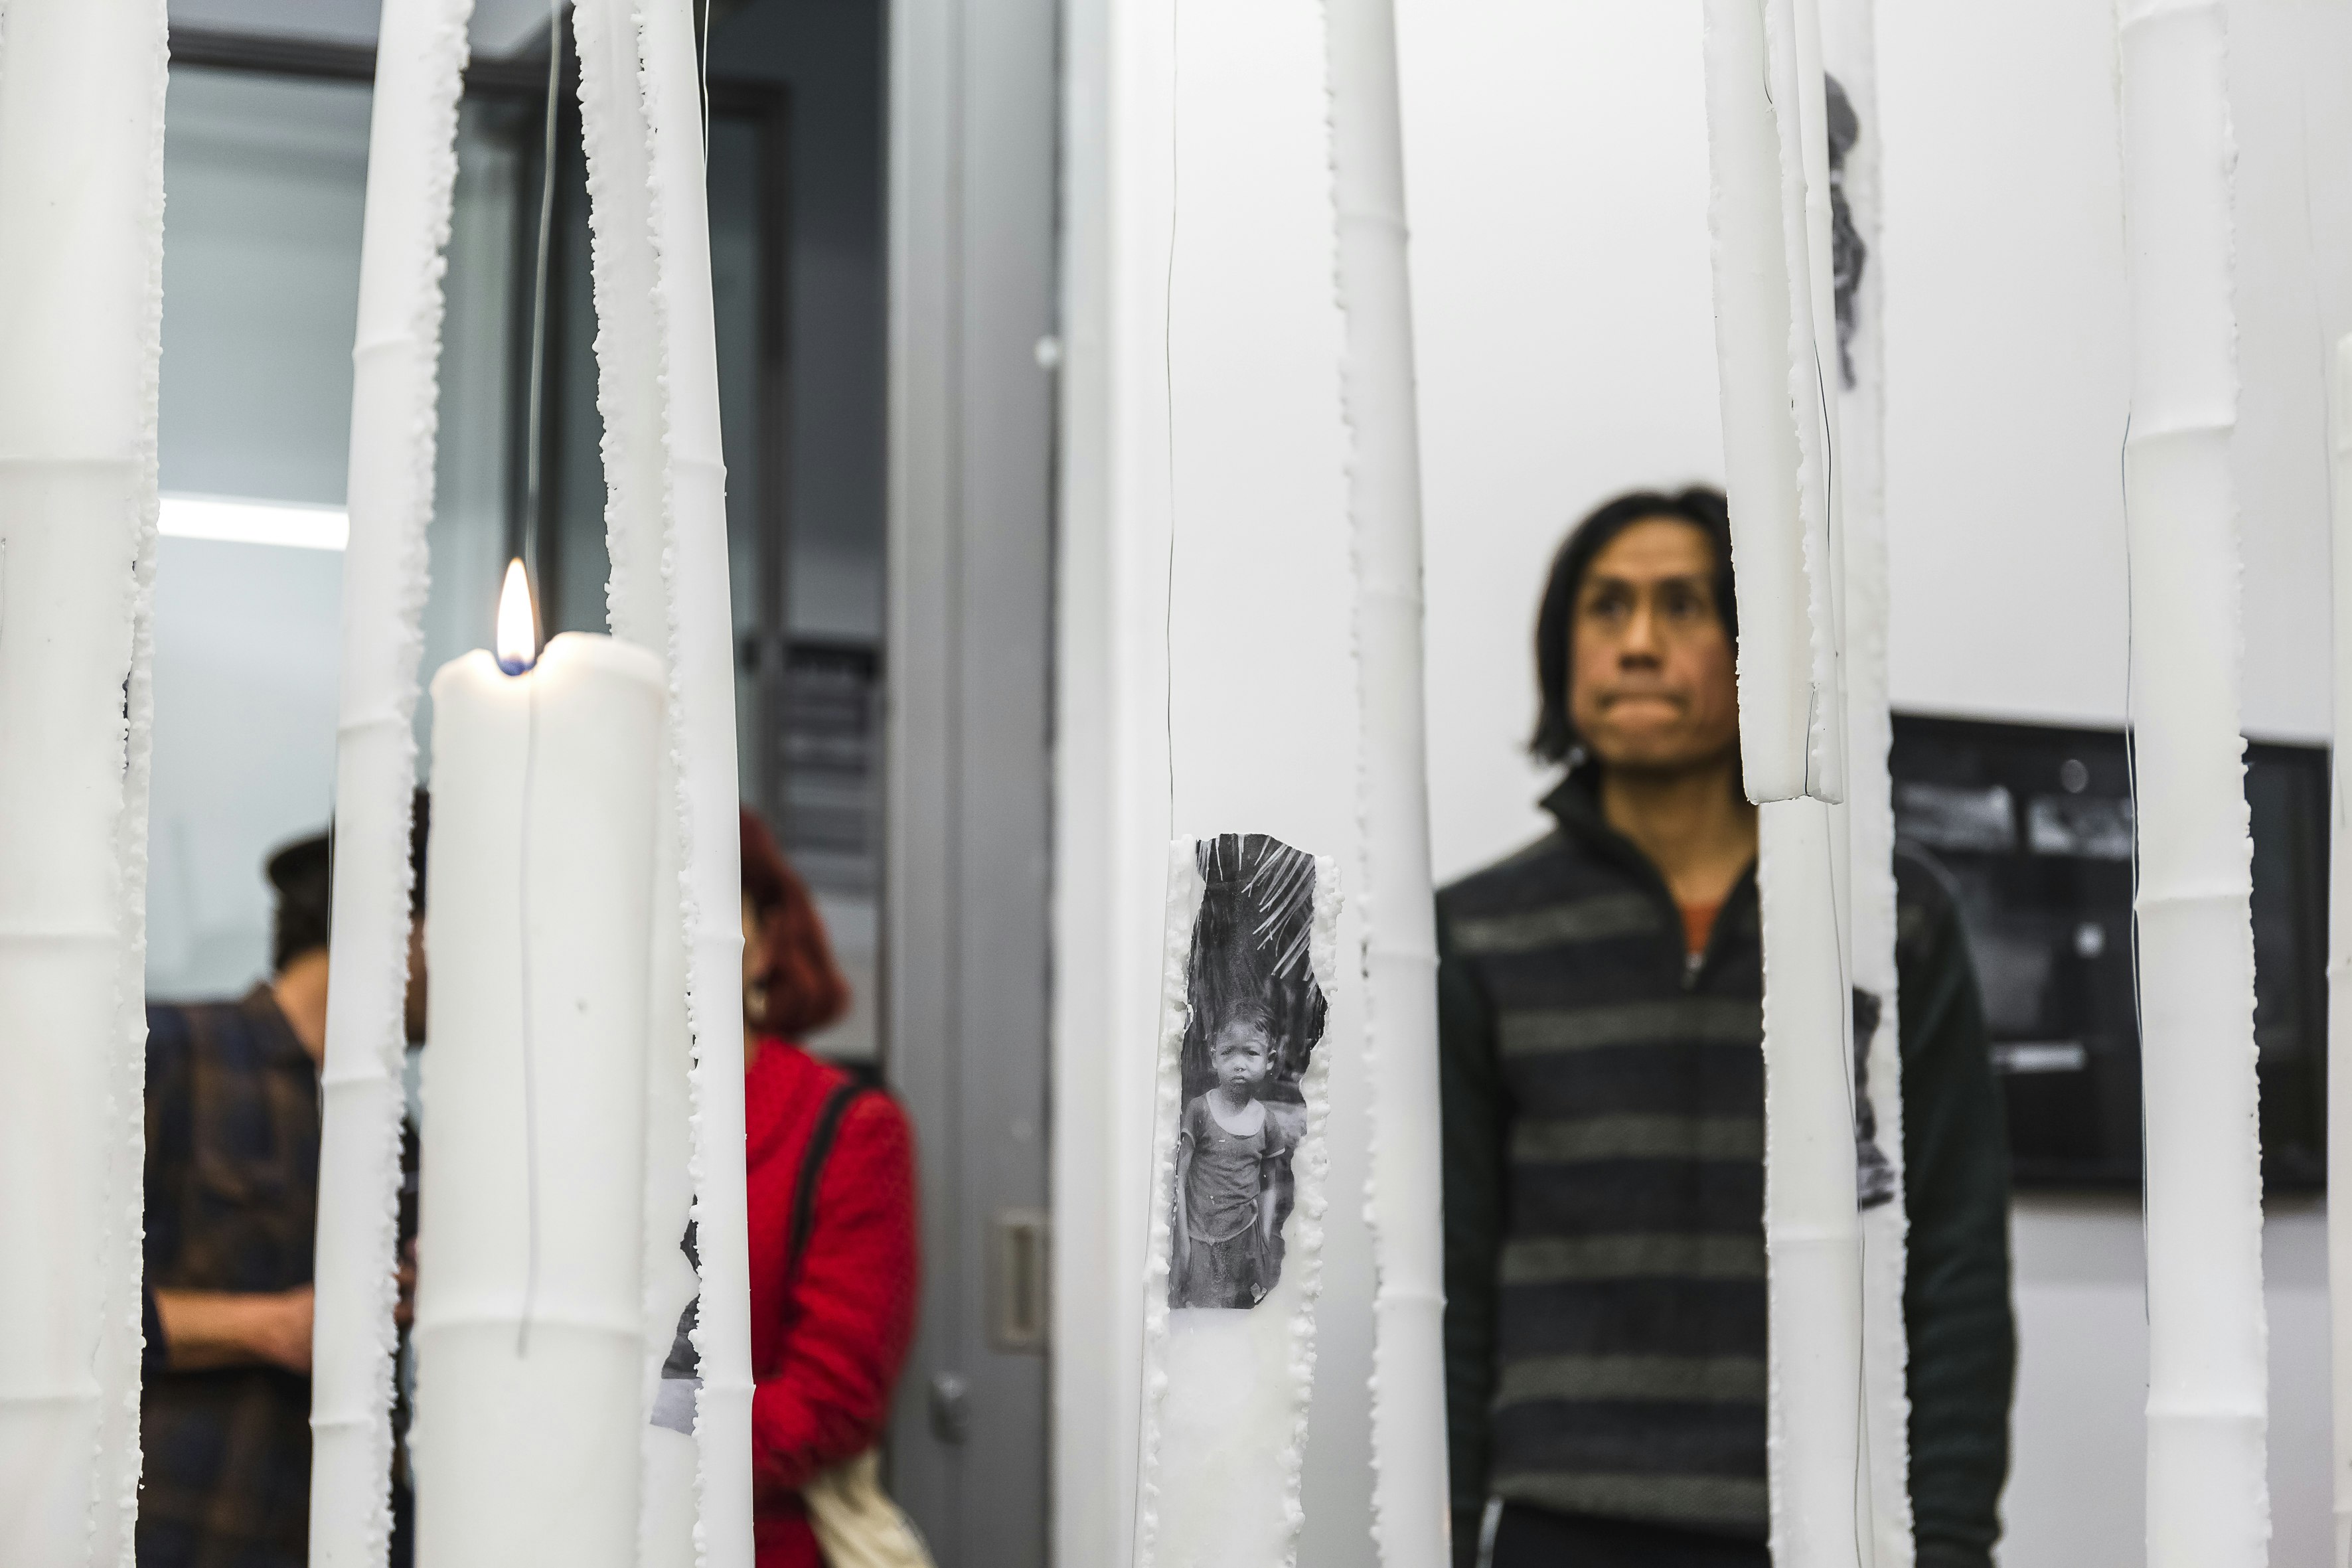 Dacchi stands before his installation in the ground floor 4A gallery space. A series of white candles and a small black-and-white photographic print of a boy is shown as part of the installation.